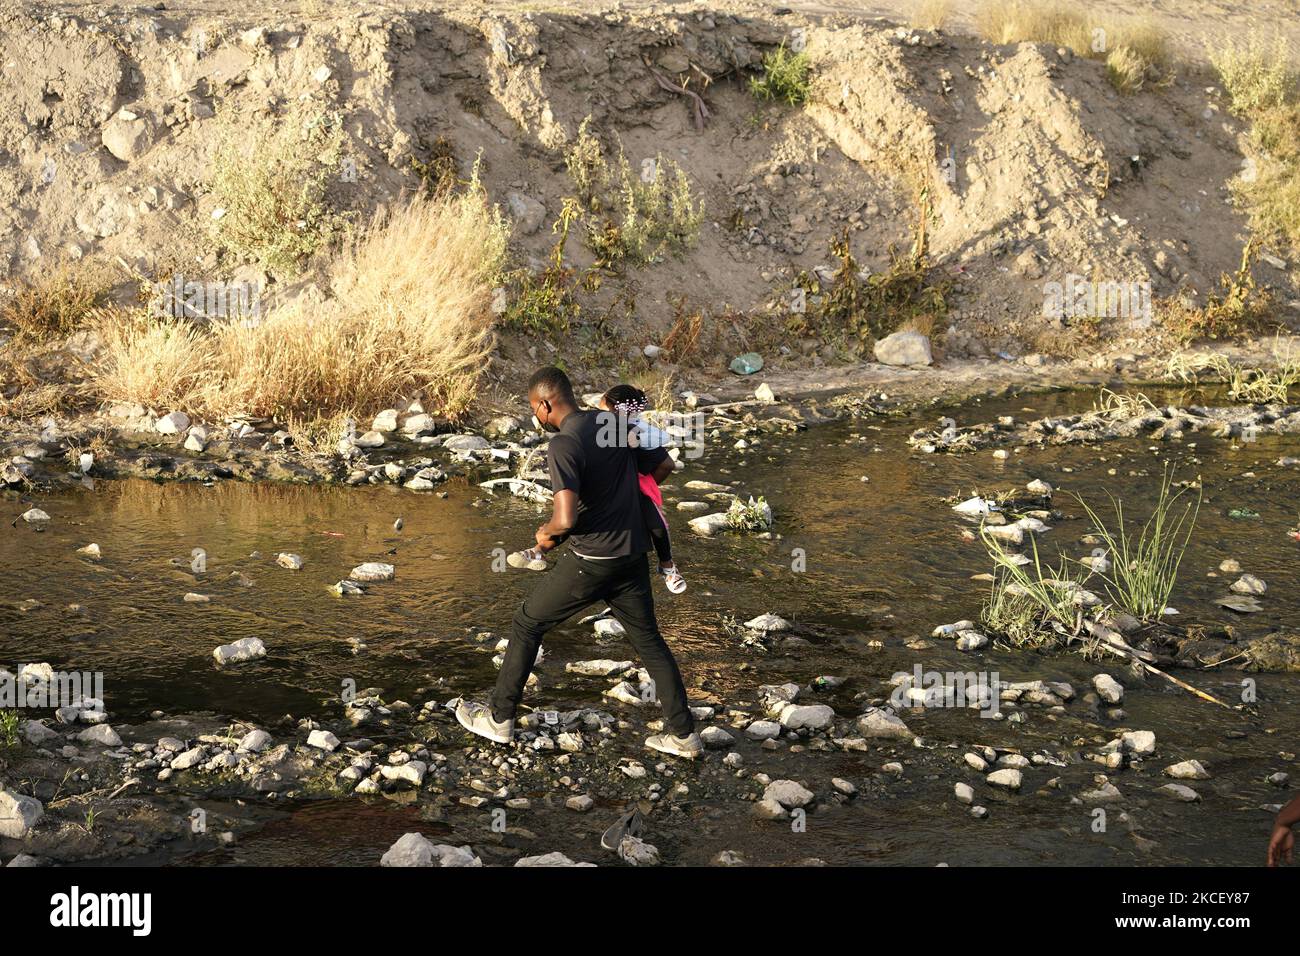 Migrants cross into the US from Mexico along Rio Bravo on May 19,2021 in Ciudad Juarez Mexico.According to unofficial estimates approximately 200,000 migrants have crossed into the United States along the southern border since February 2021. (Photo by John Lamparski/NurPhoto) Stock Photo